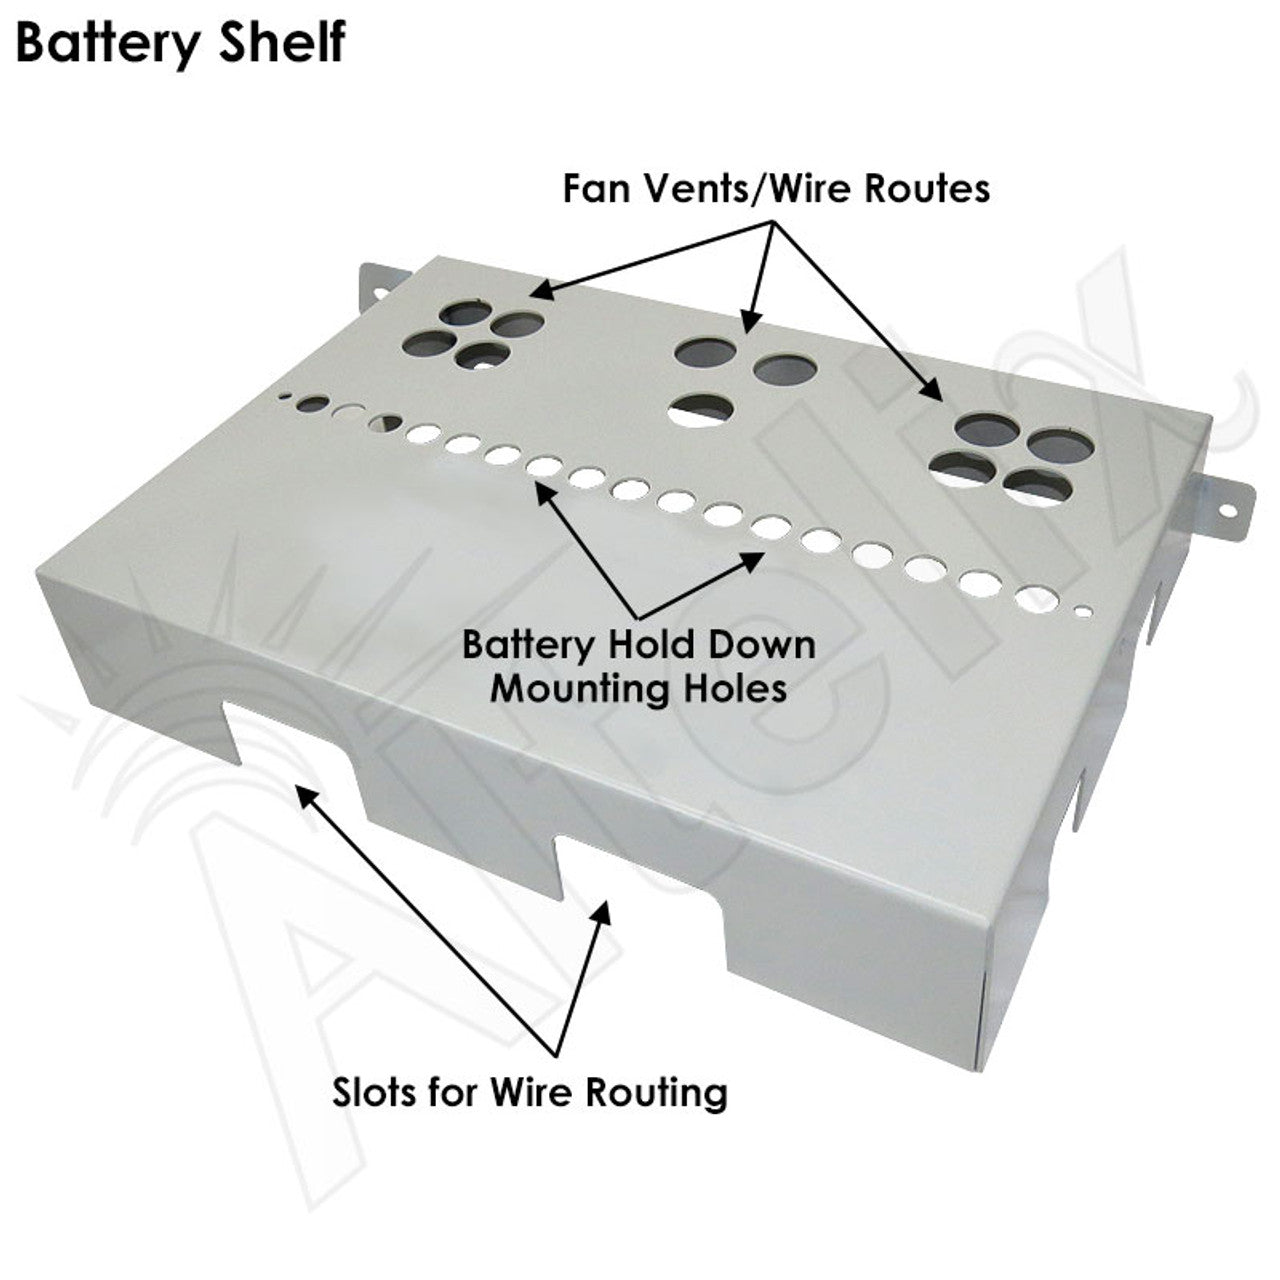 Steel Battery/Utility Shelf with Adjustable Battery Hold Down for NS Enclosures-2